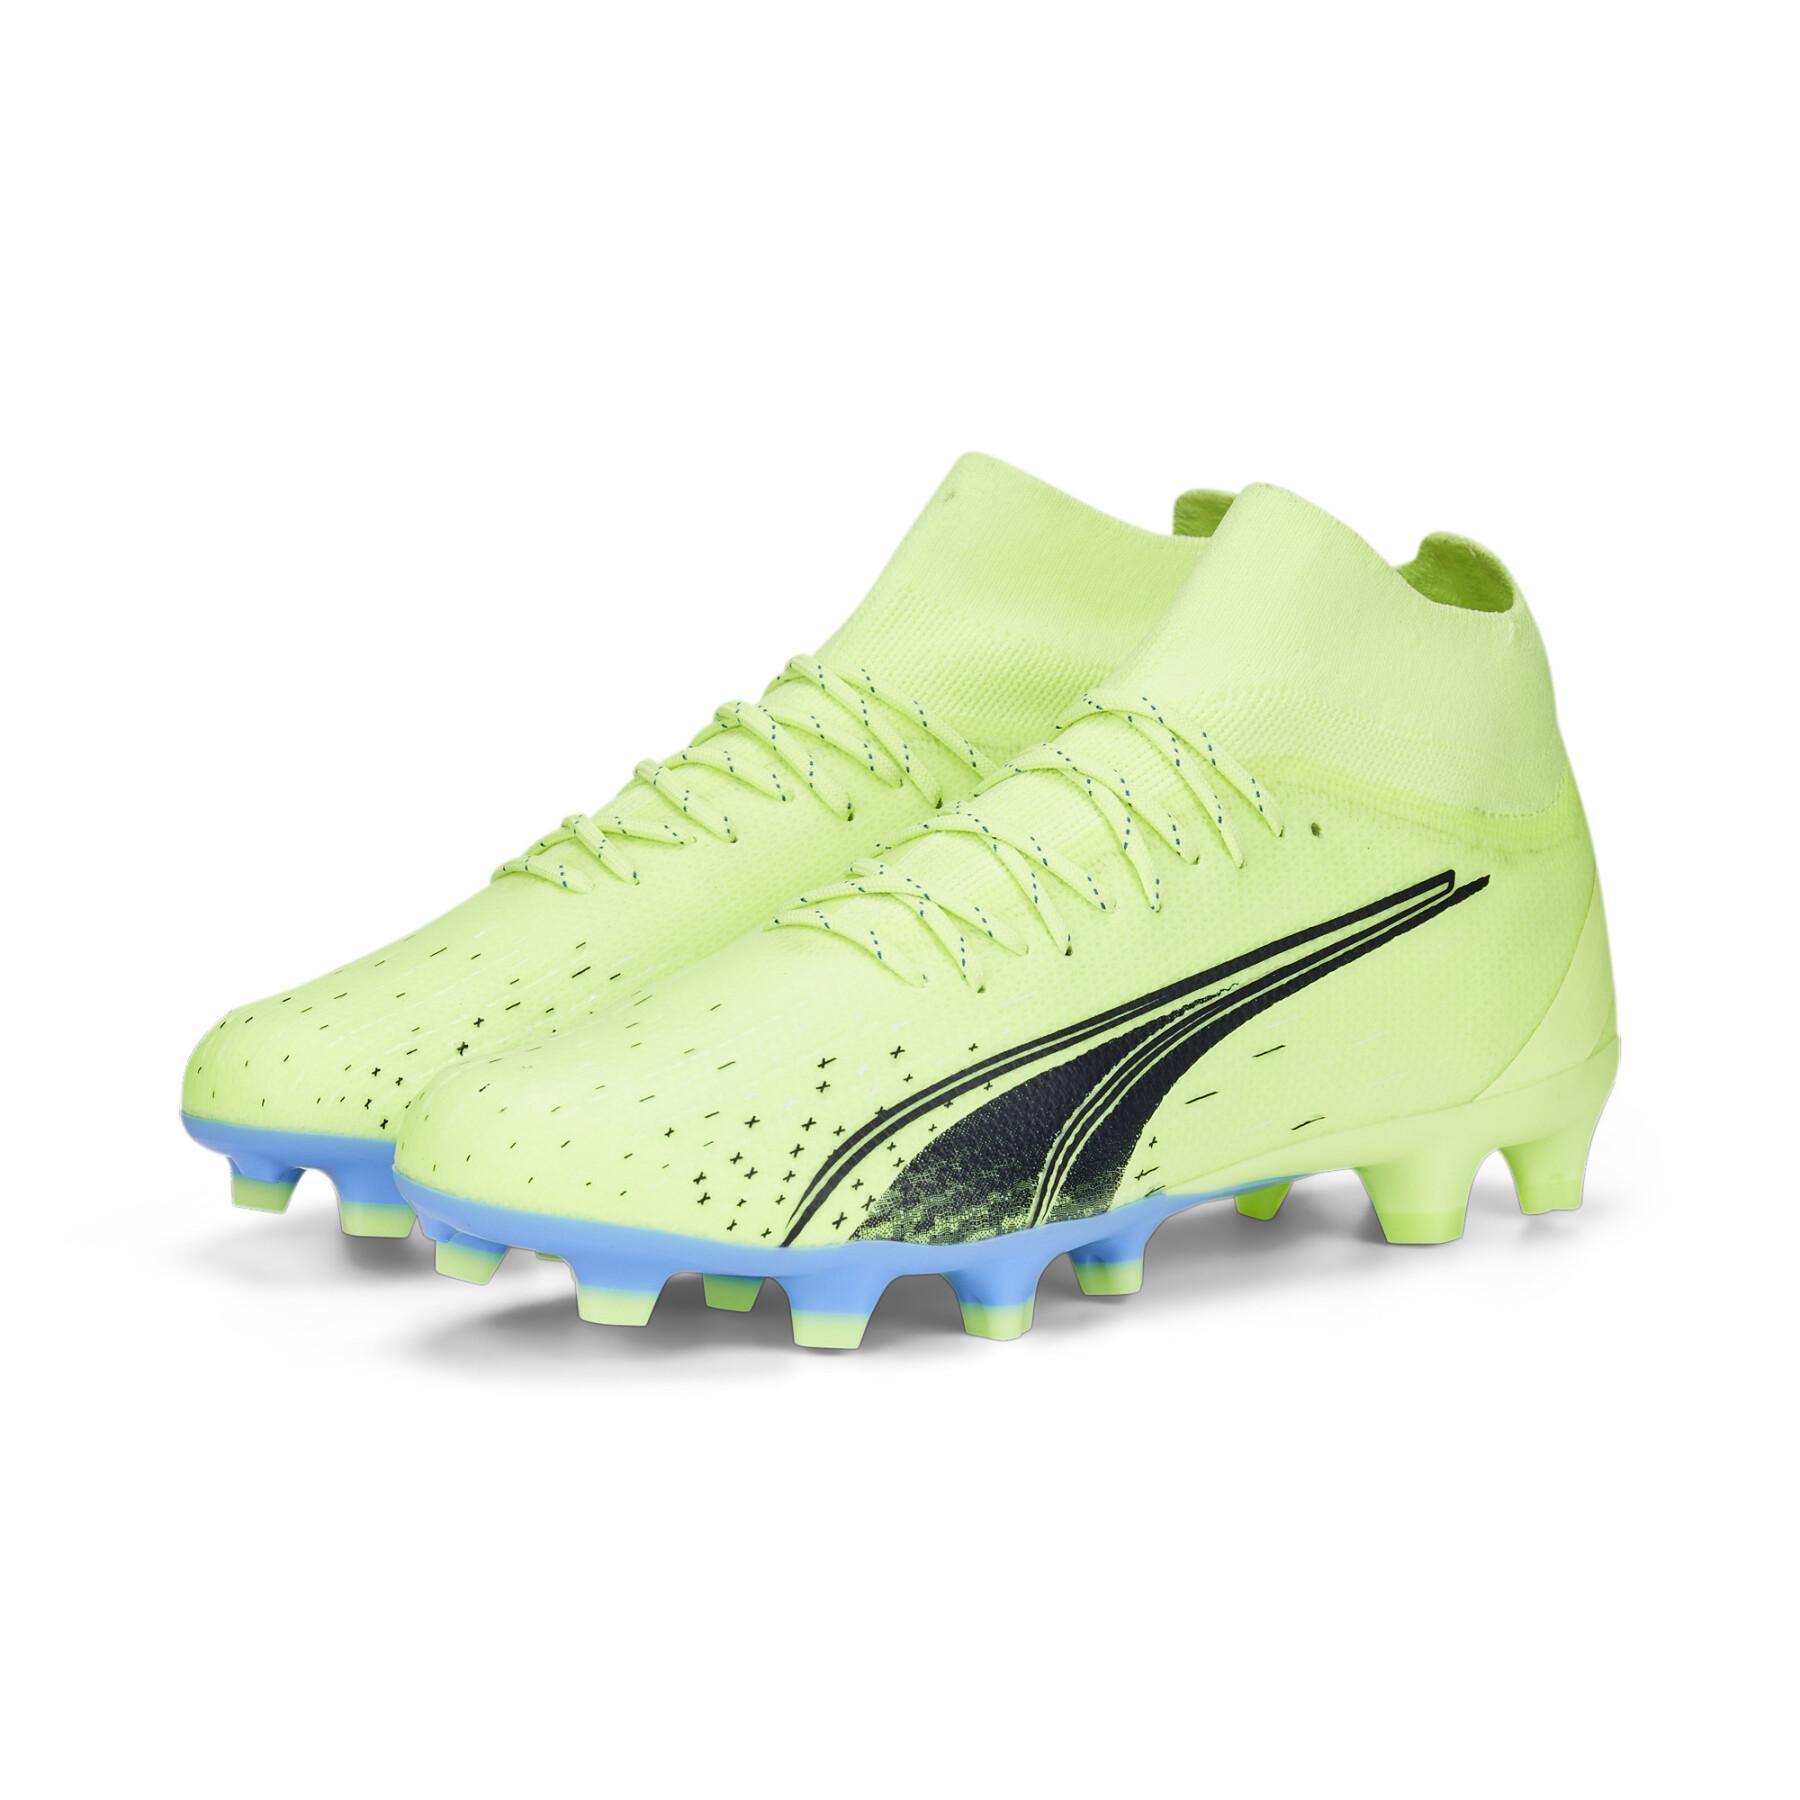 Soccer shoes Puma Ultra Pro FG/AG - Fastest Pack